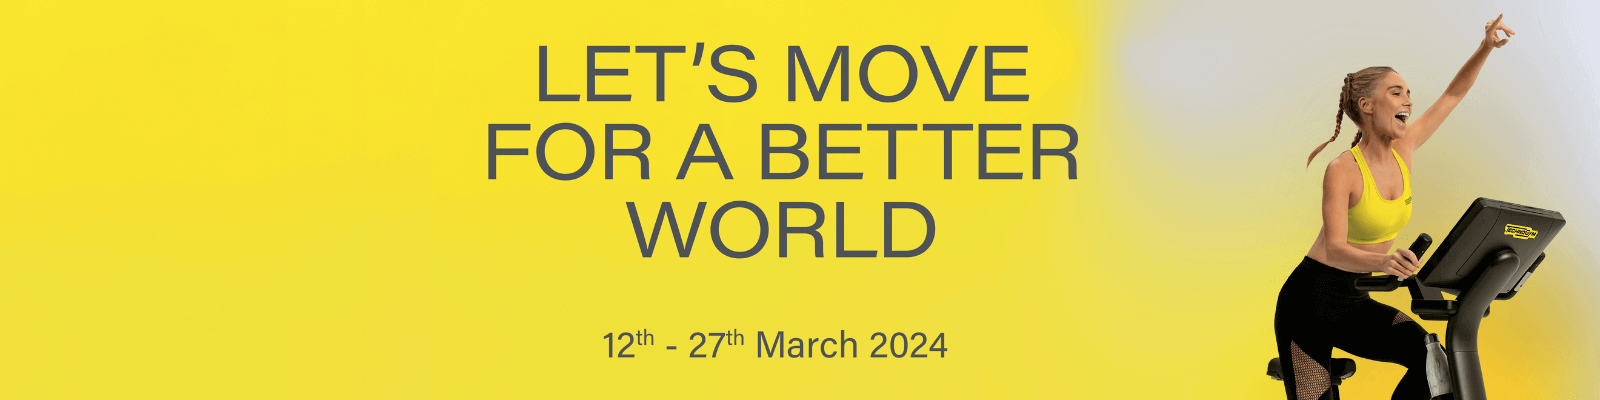 Lets Move for a better World 12-27 March 2024 poster